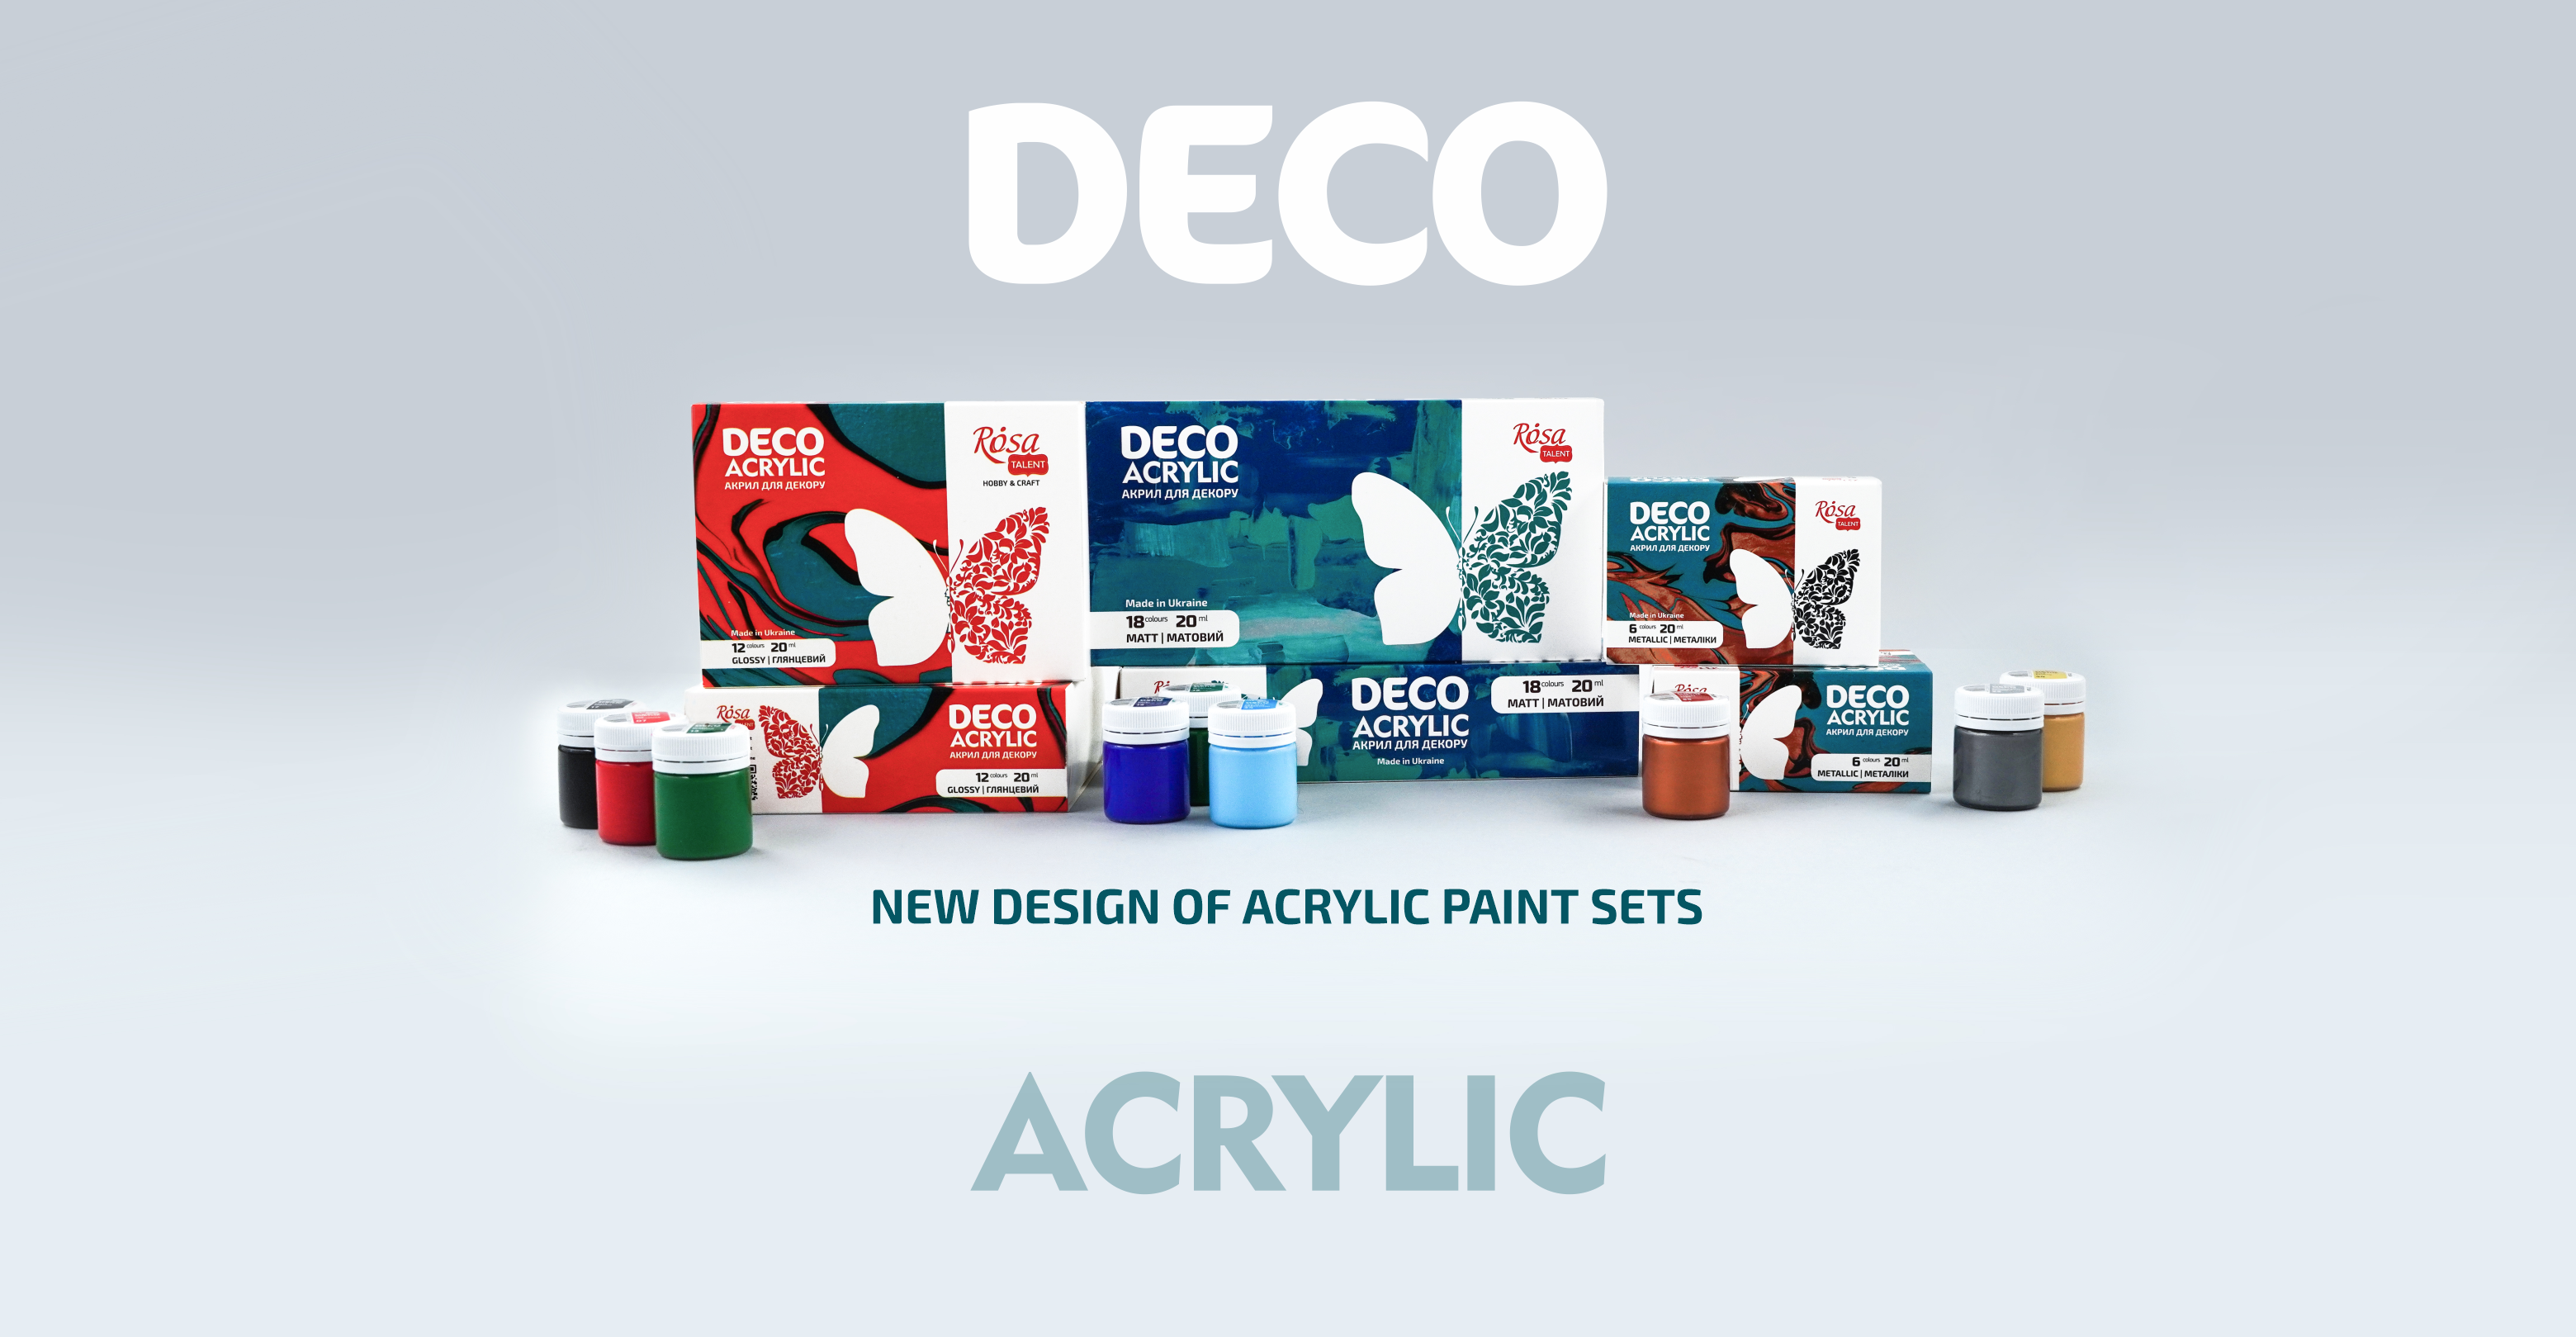 ROSA Talent acrylic sets for decorating